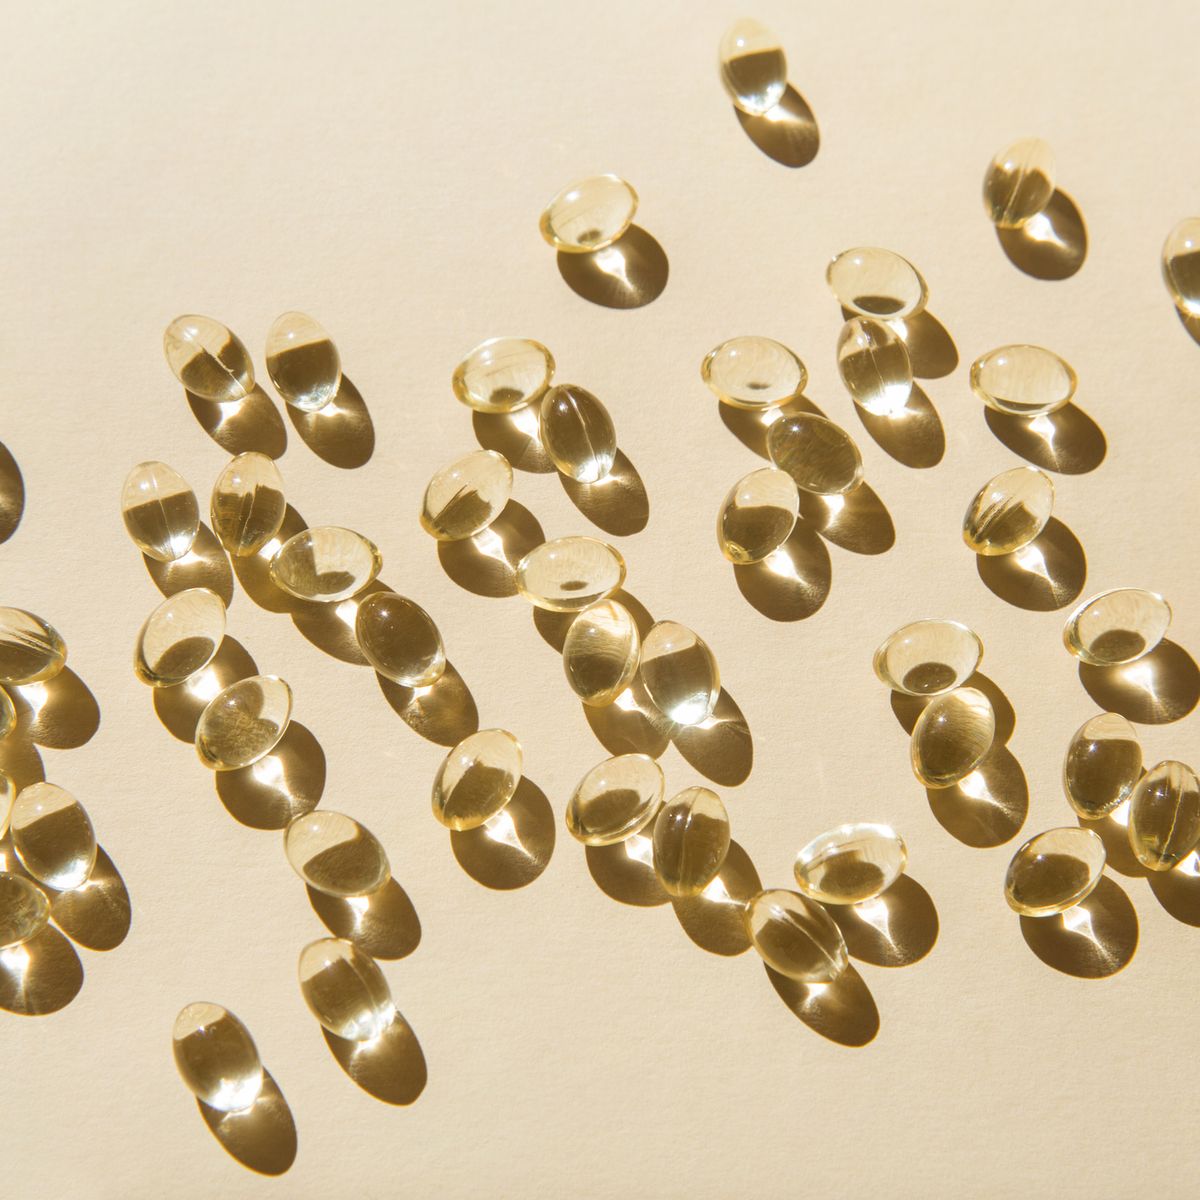 Are Vitamin D supplements actually worth it? #HealthSupplements #VitaminDBoost bit.ly/3MxfPvx